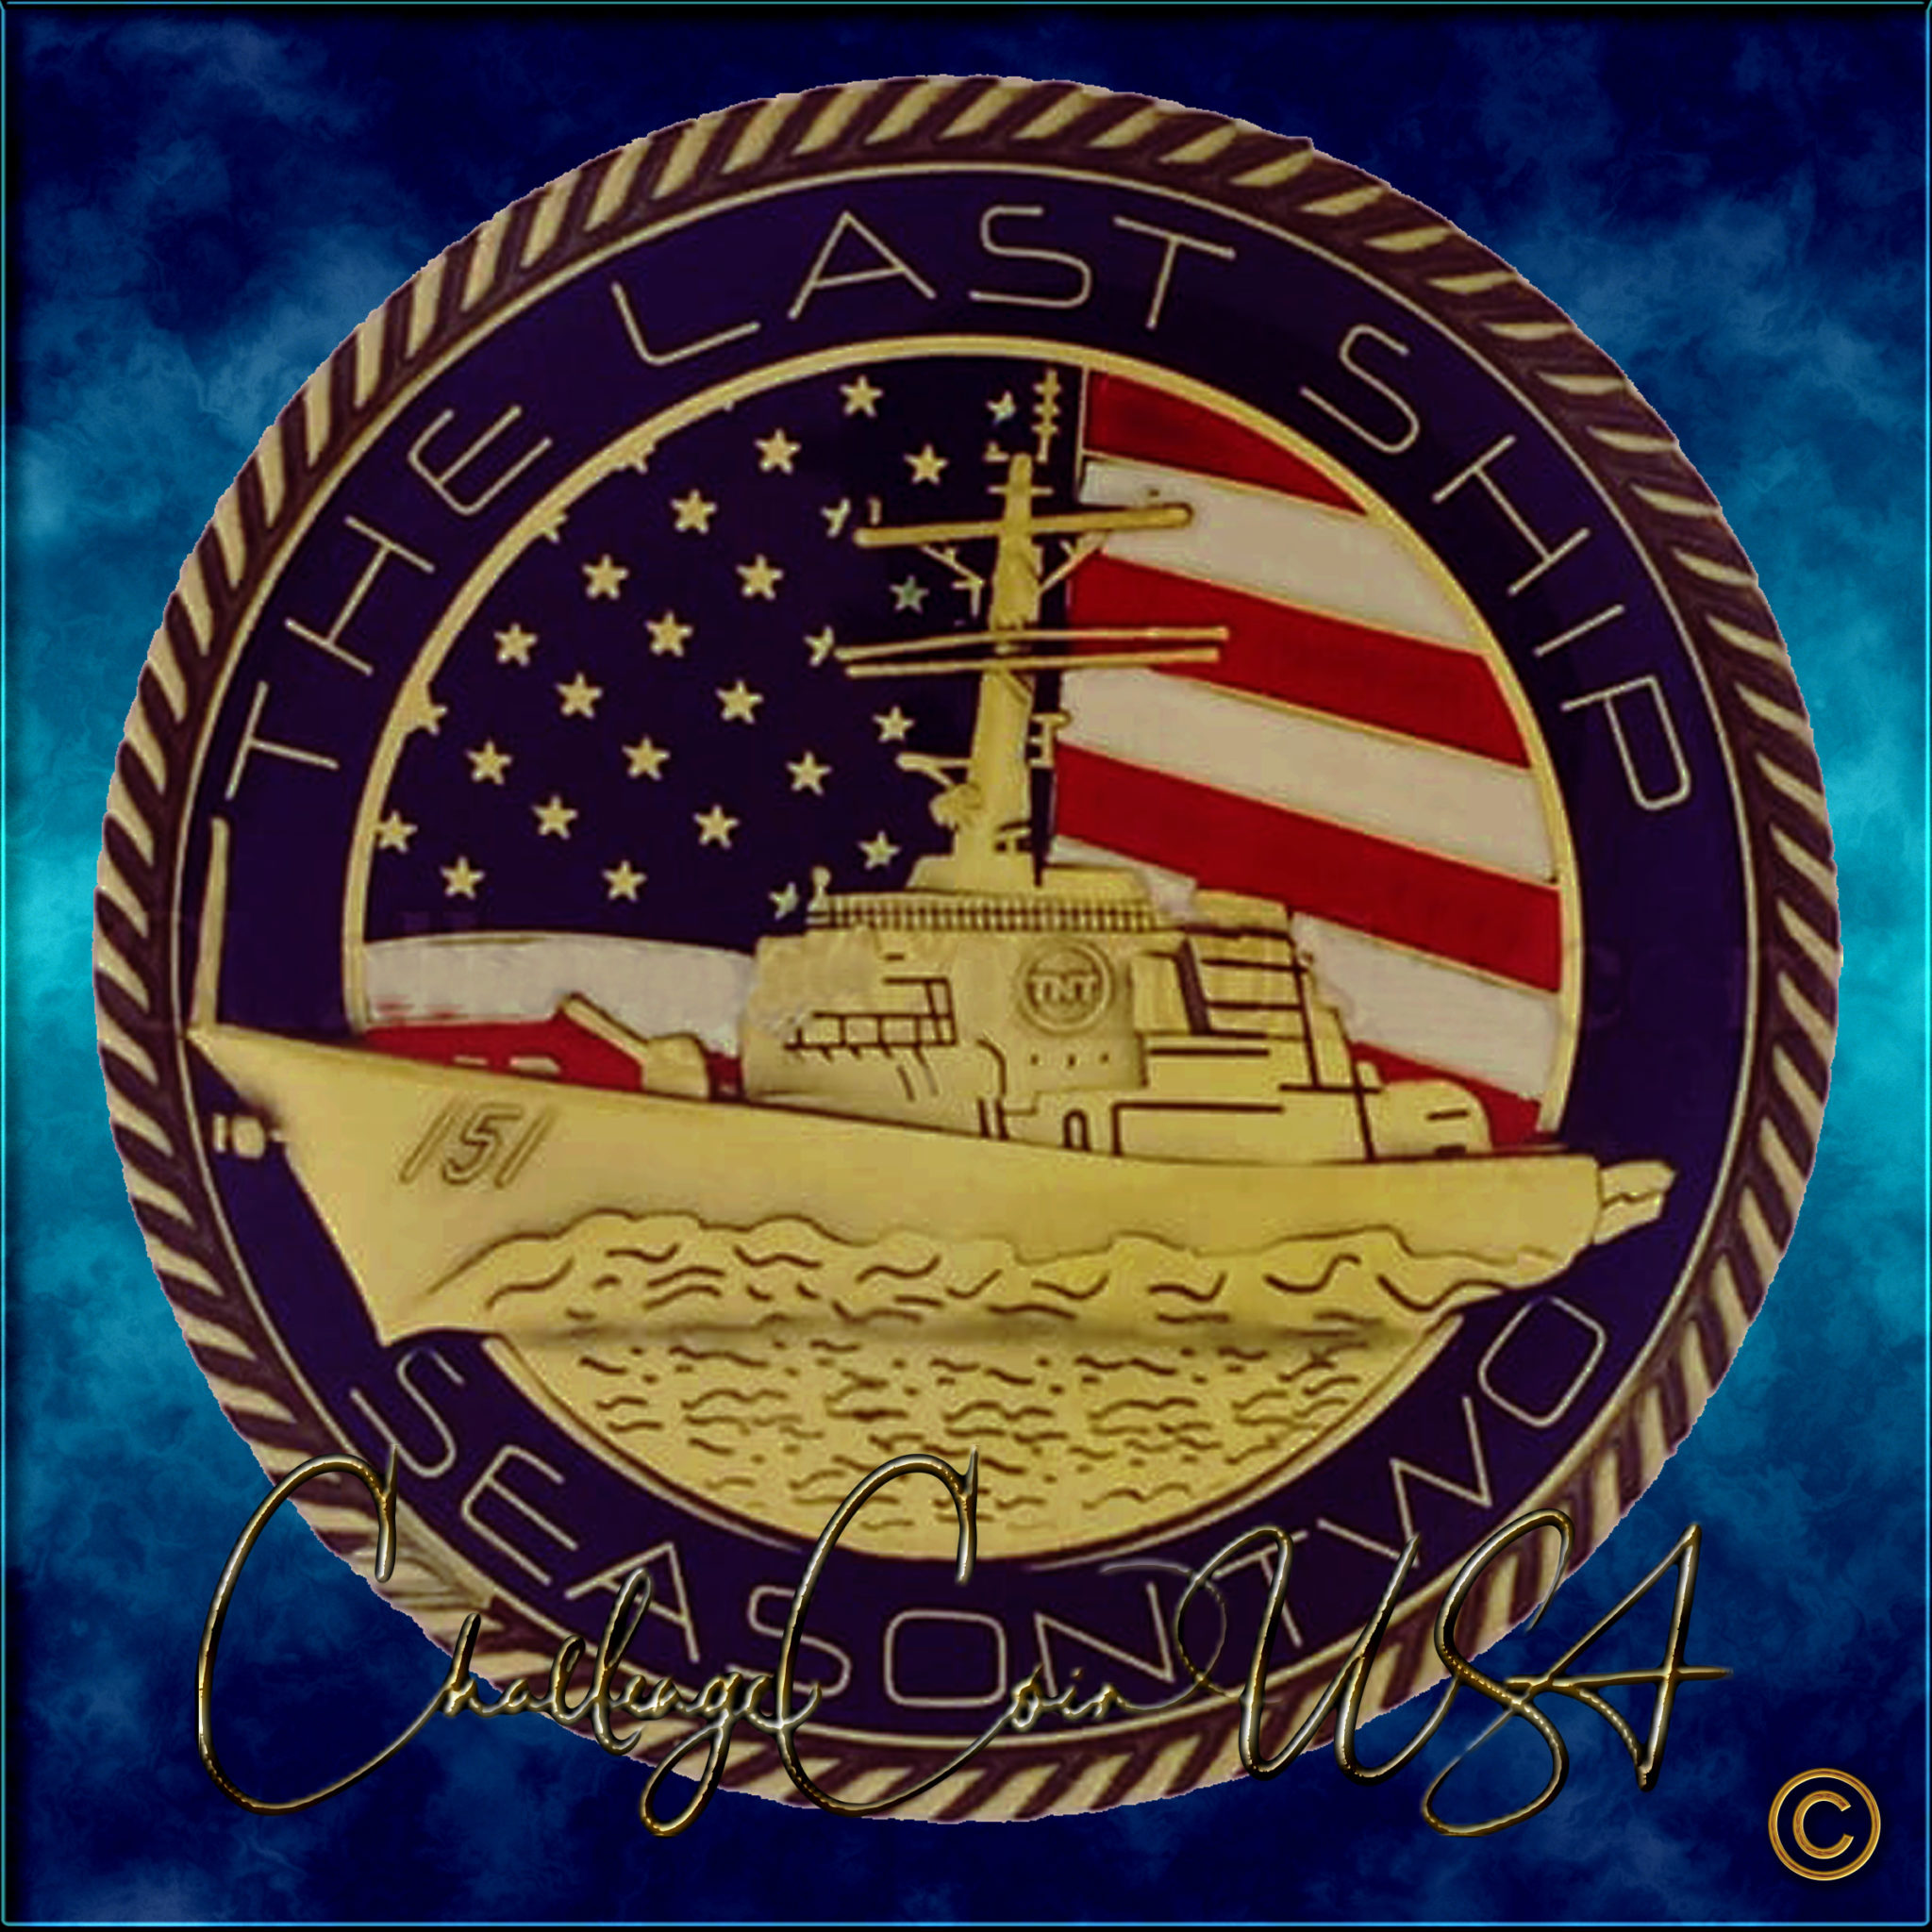 cruise ship challenge coins